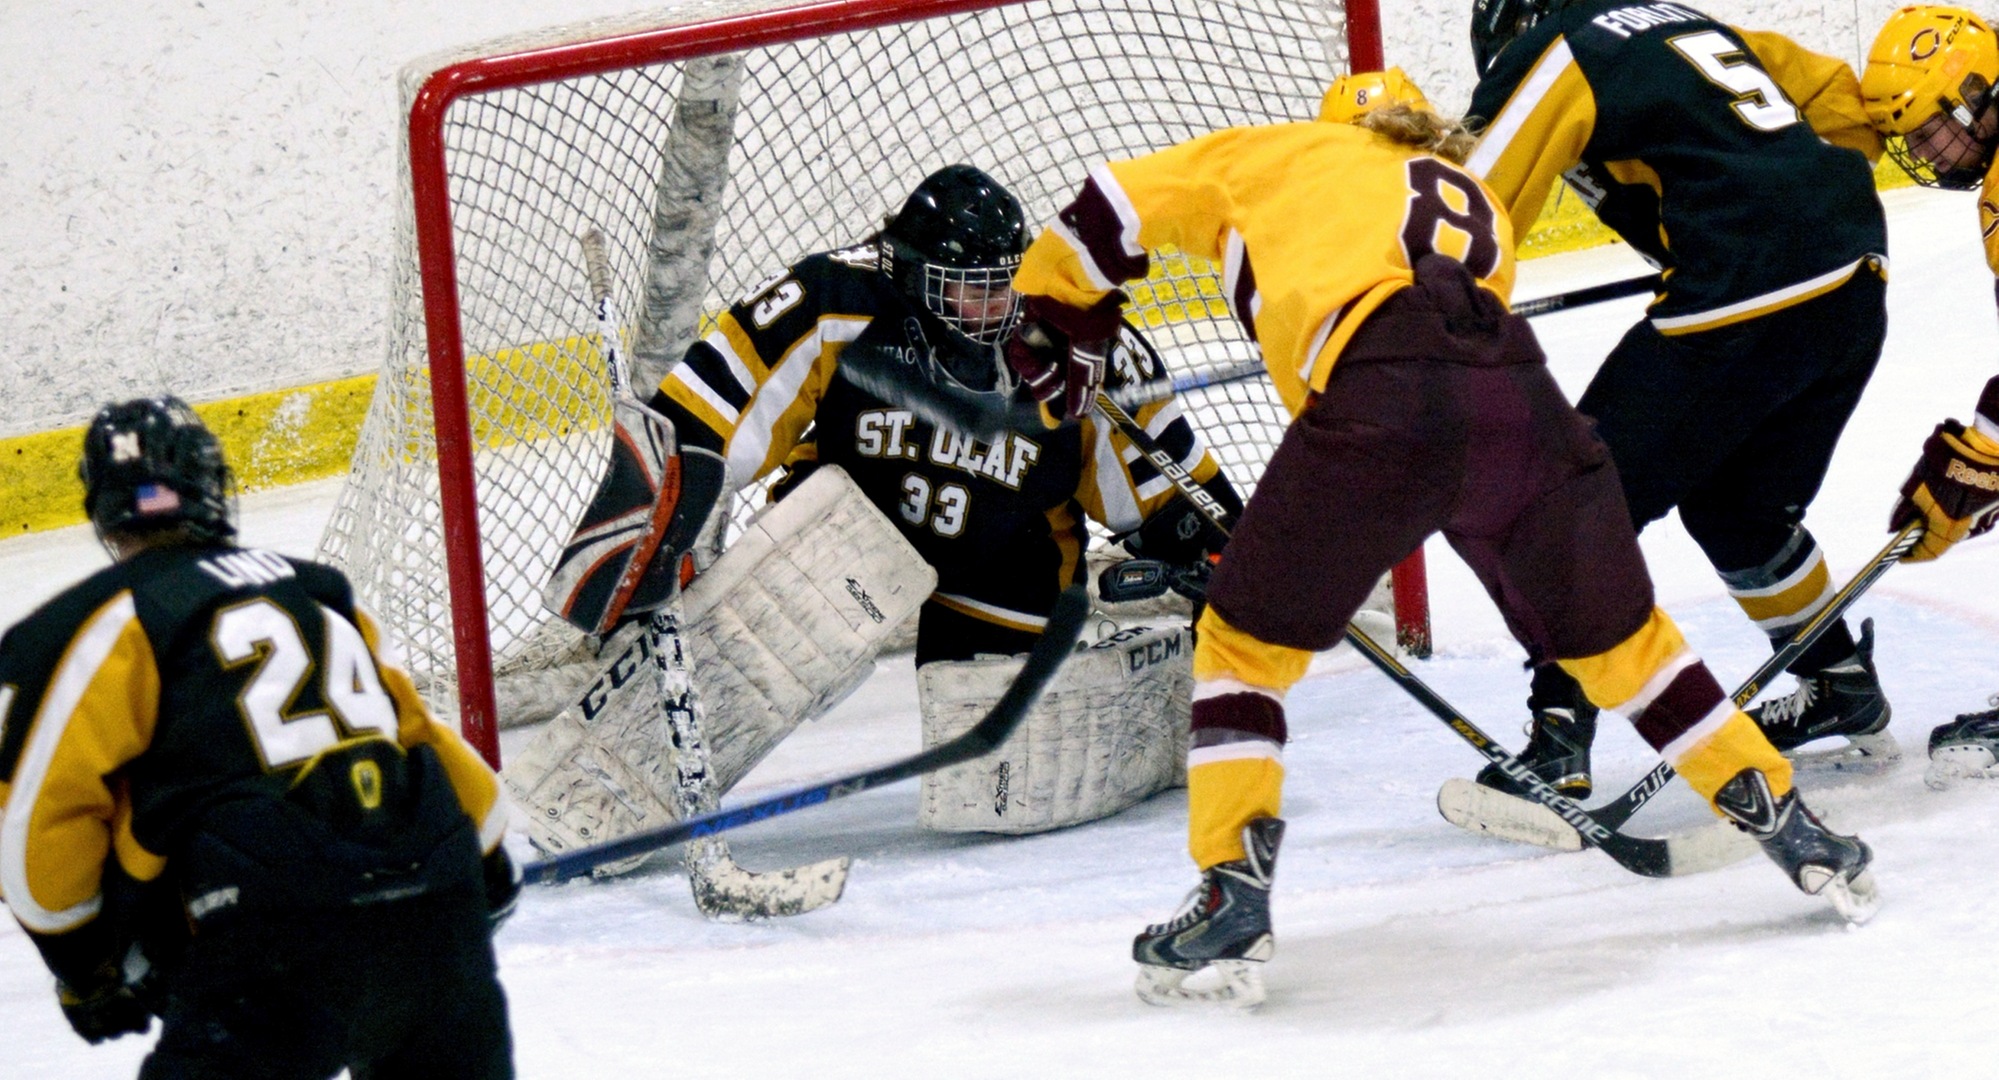 Senior Ellen Rethwisch had two goals in the Cobbers' 5-2 win at St. Olaf and now leads the MIAC in goals scored in league games.